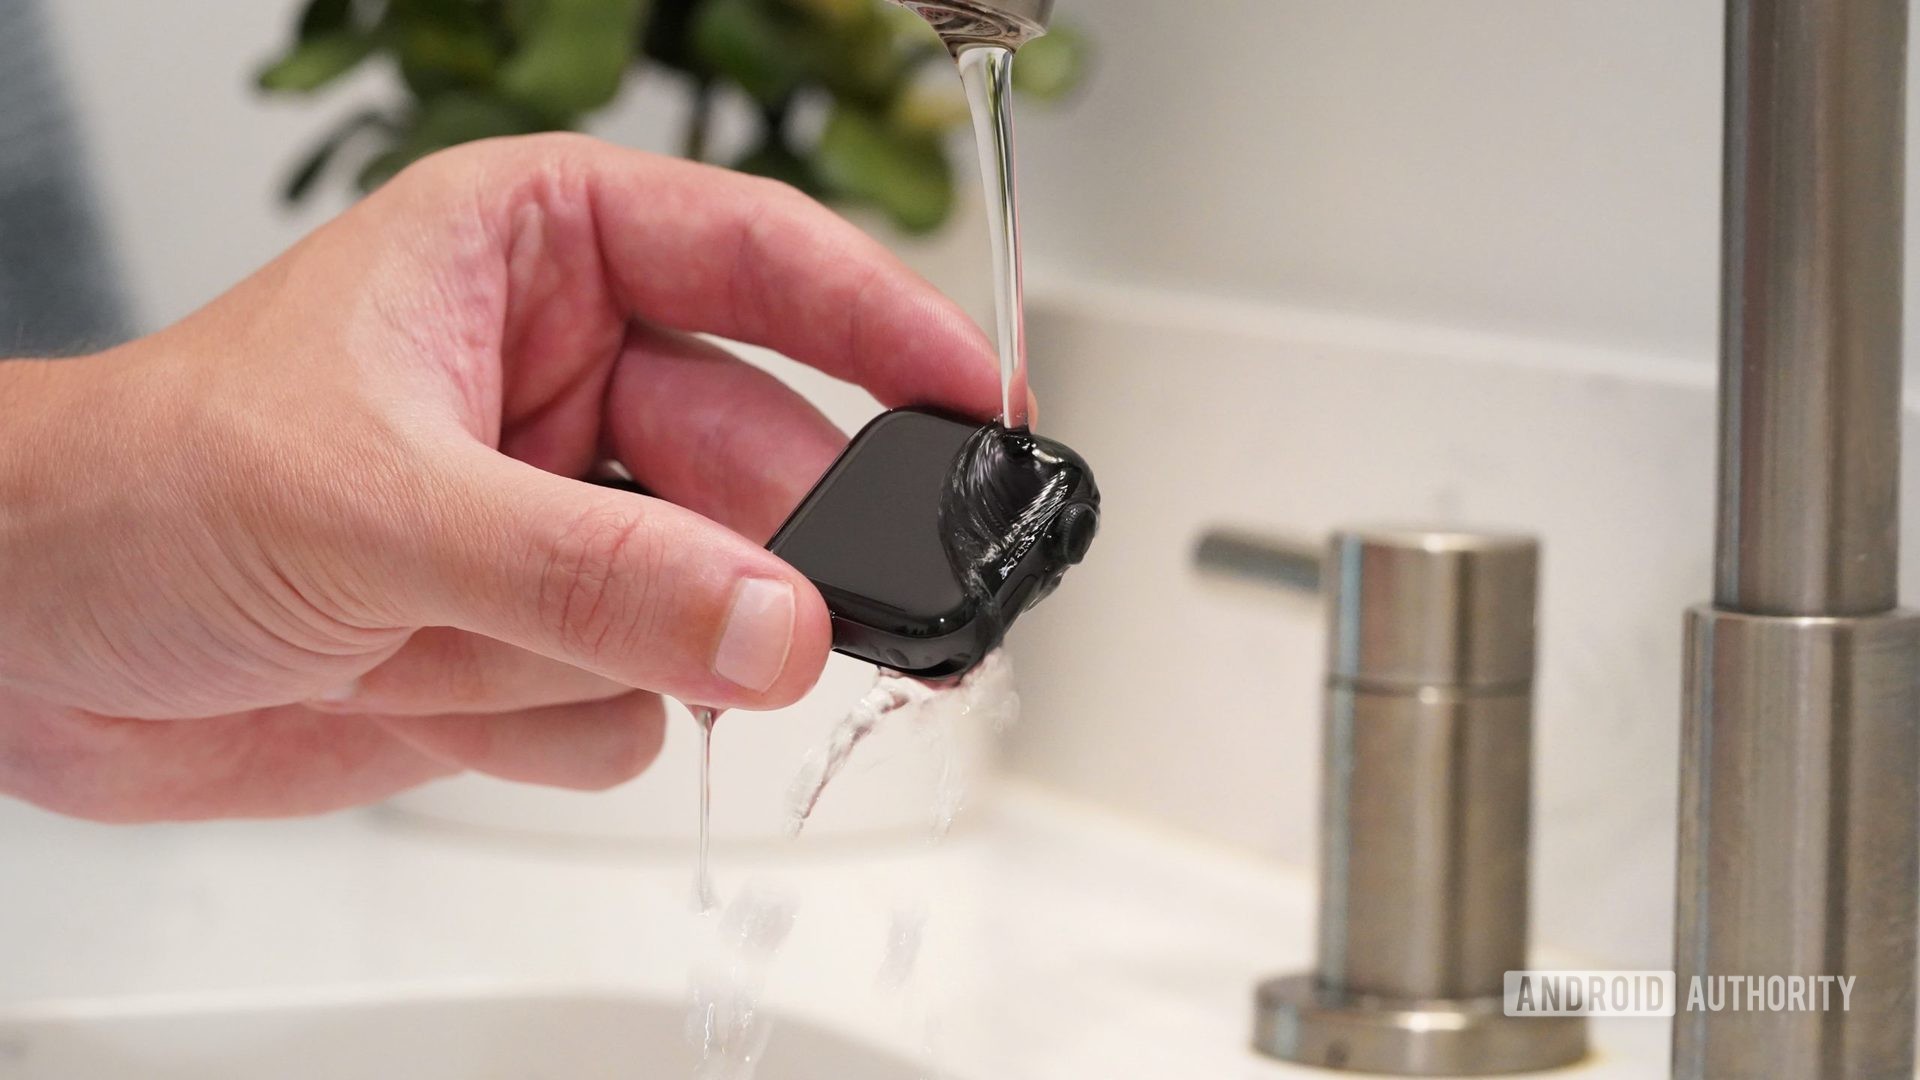 The male hand holds the Apple Watch Series 6 under warm, shallow running water to clean the device.